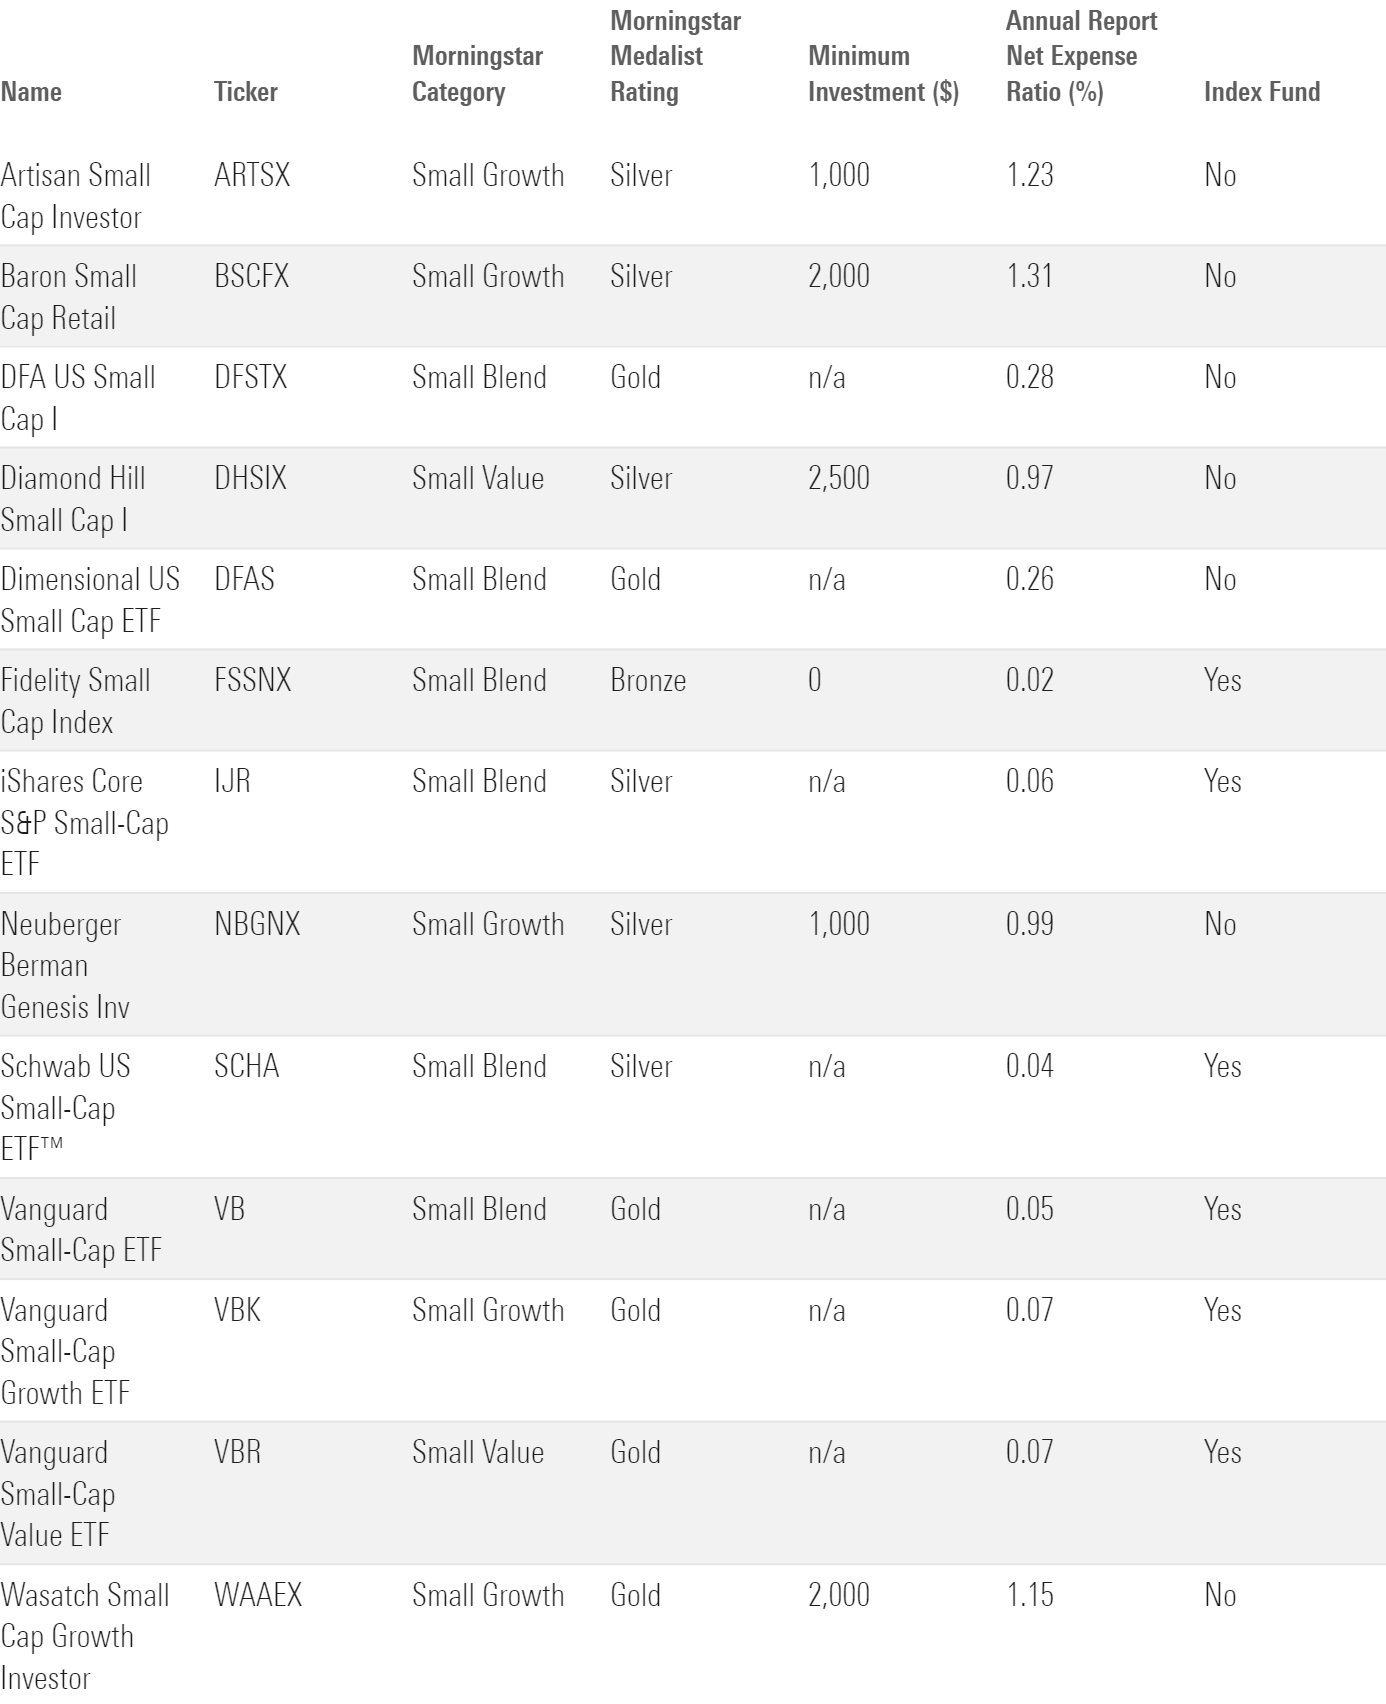 A table showing key stats for selected small-cap funds and ETFs with above-average Morningstar Medalist Ratings.